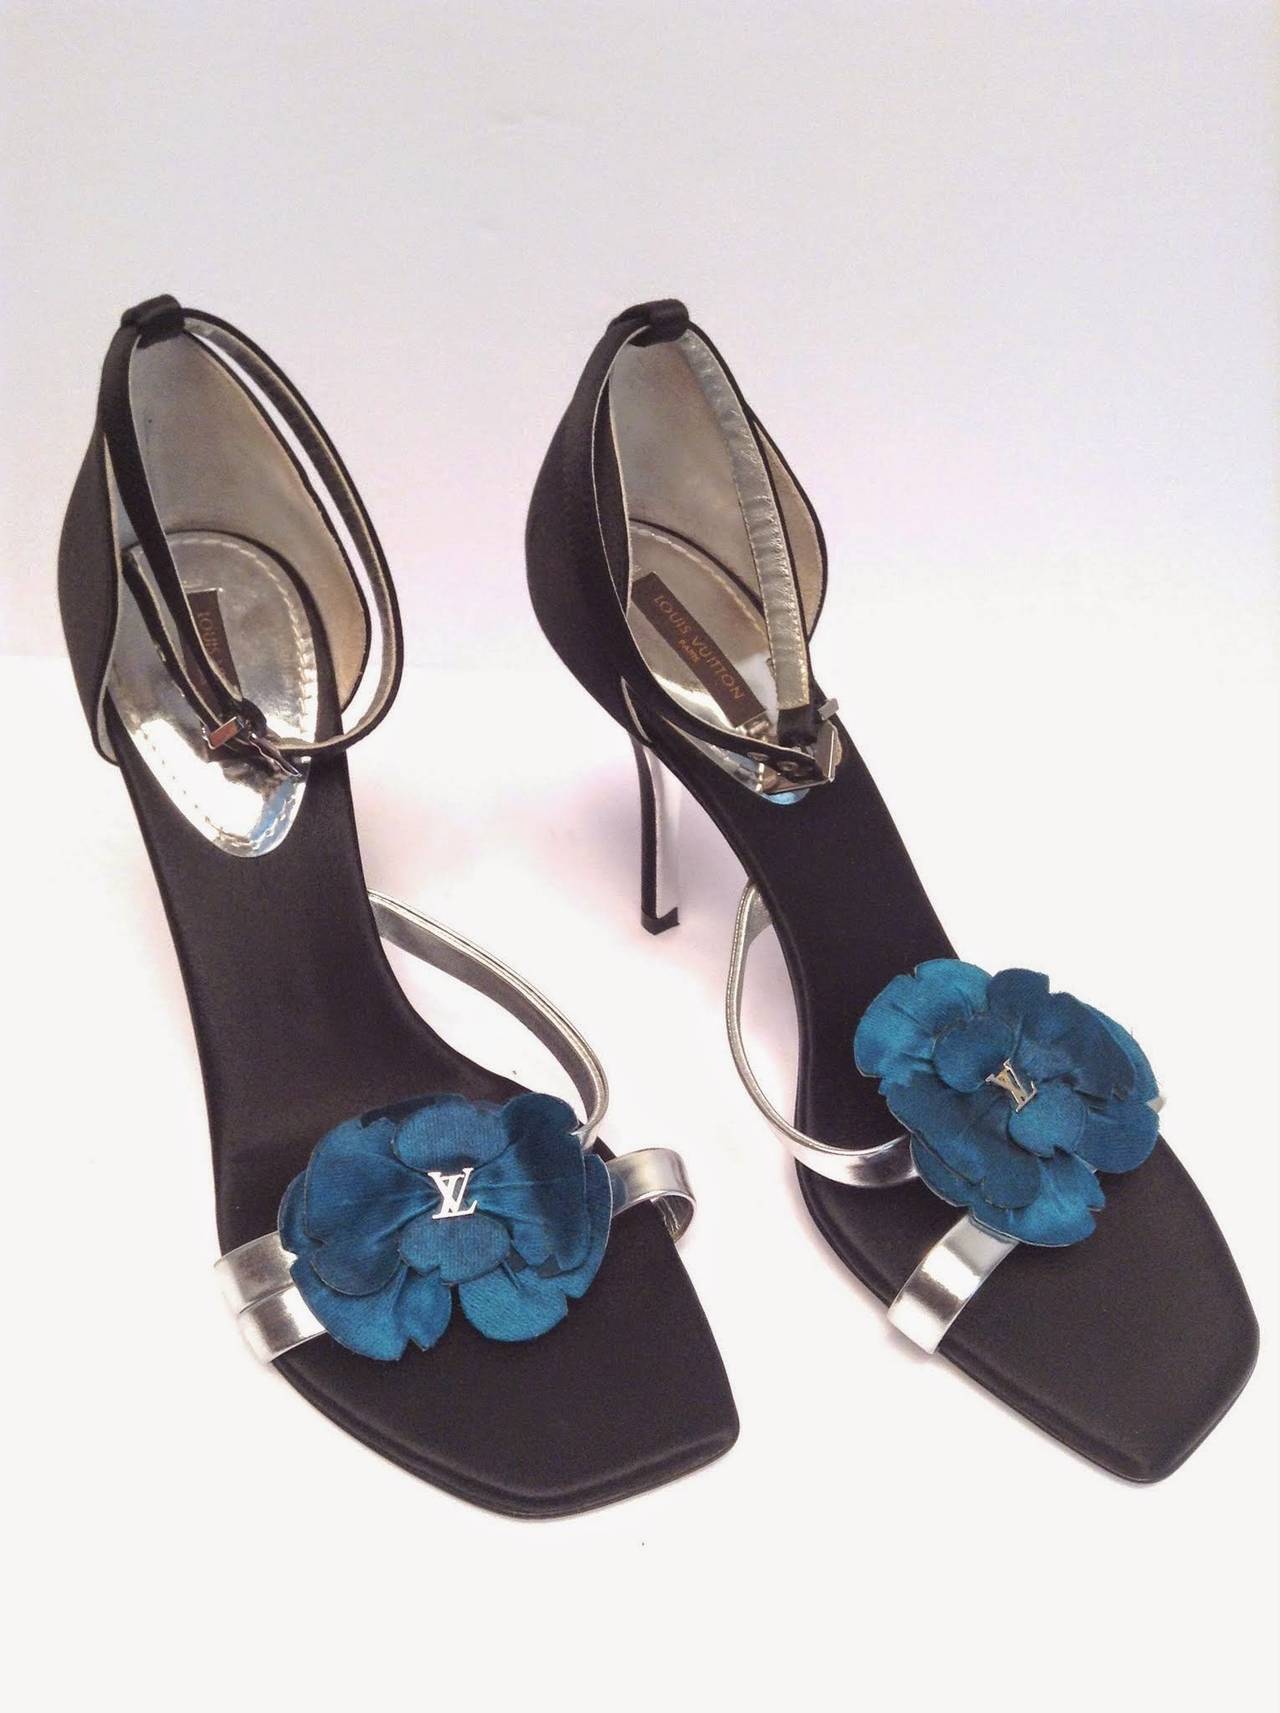 Beautiful black satin sandals with silver leather straps over the toes embellished with teal silk flower petals and silver LV logo. 

Comes with dust bags.

Heel height 3